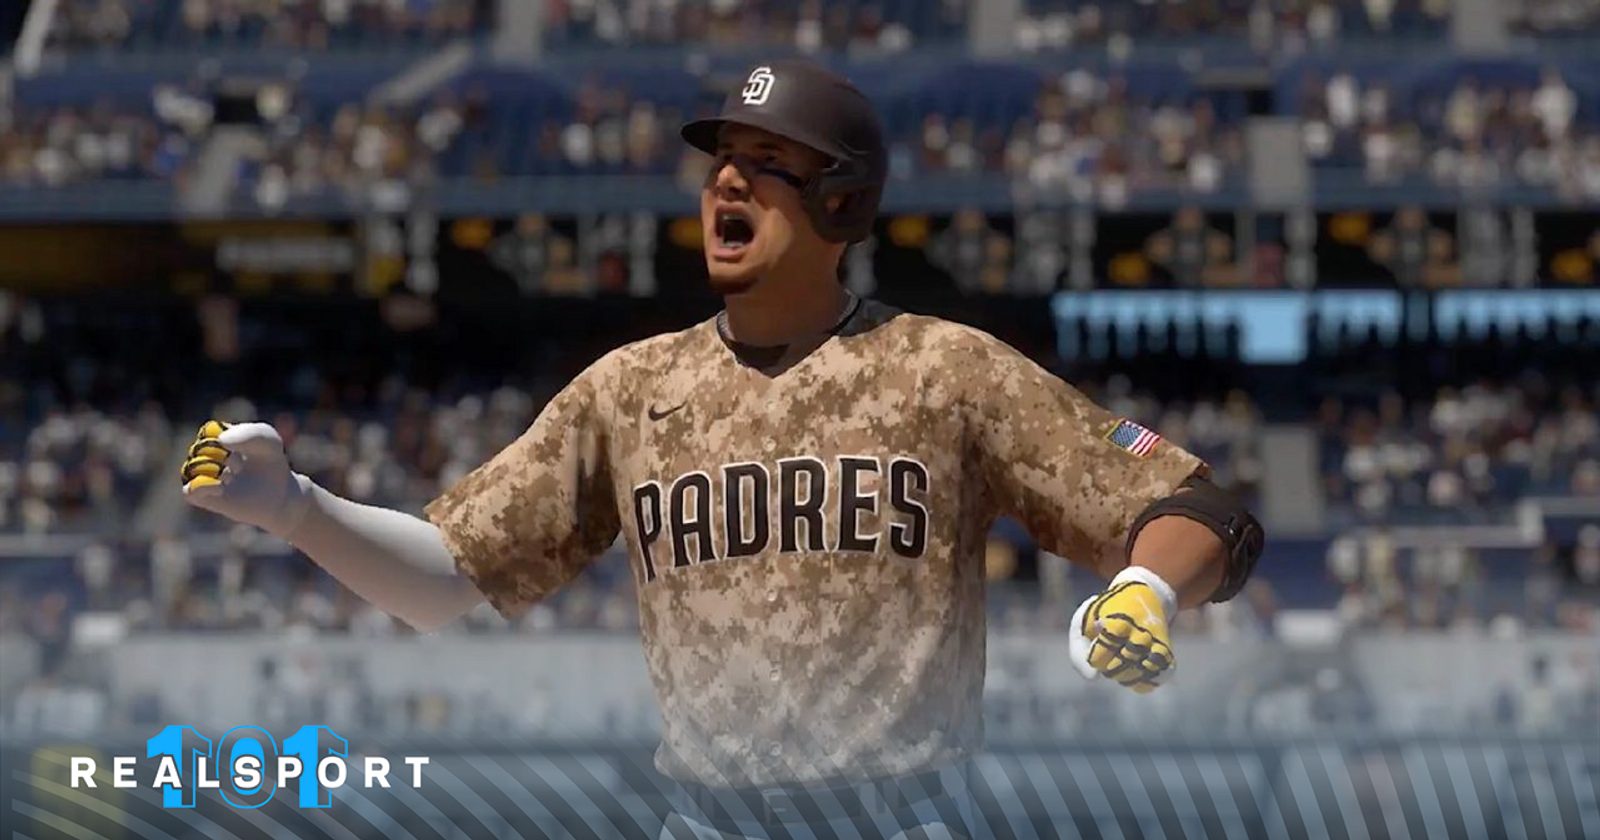 MLB® The Show™ - The Extreme Program returns in MLB® The Show™ 23